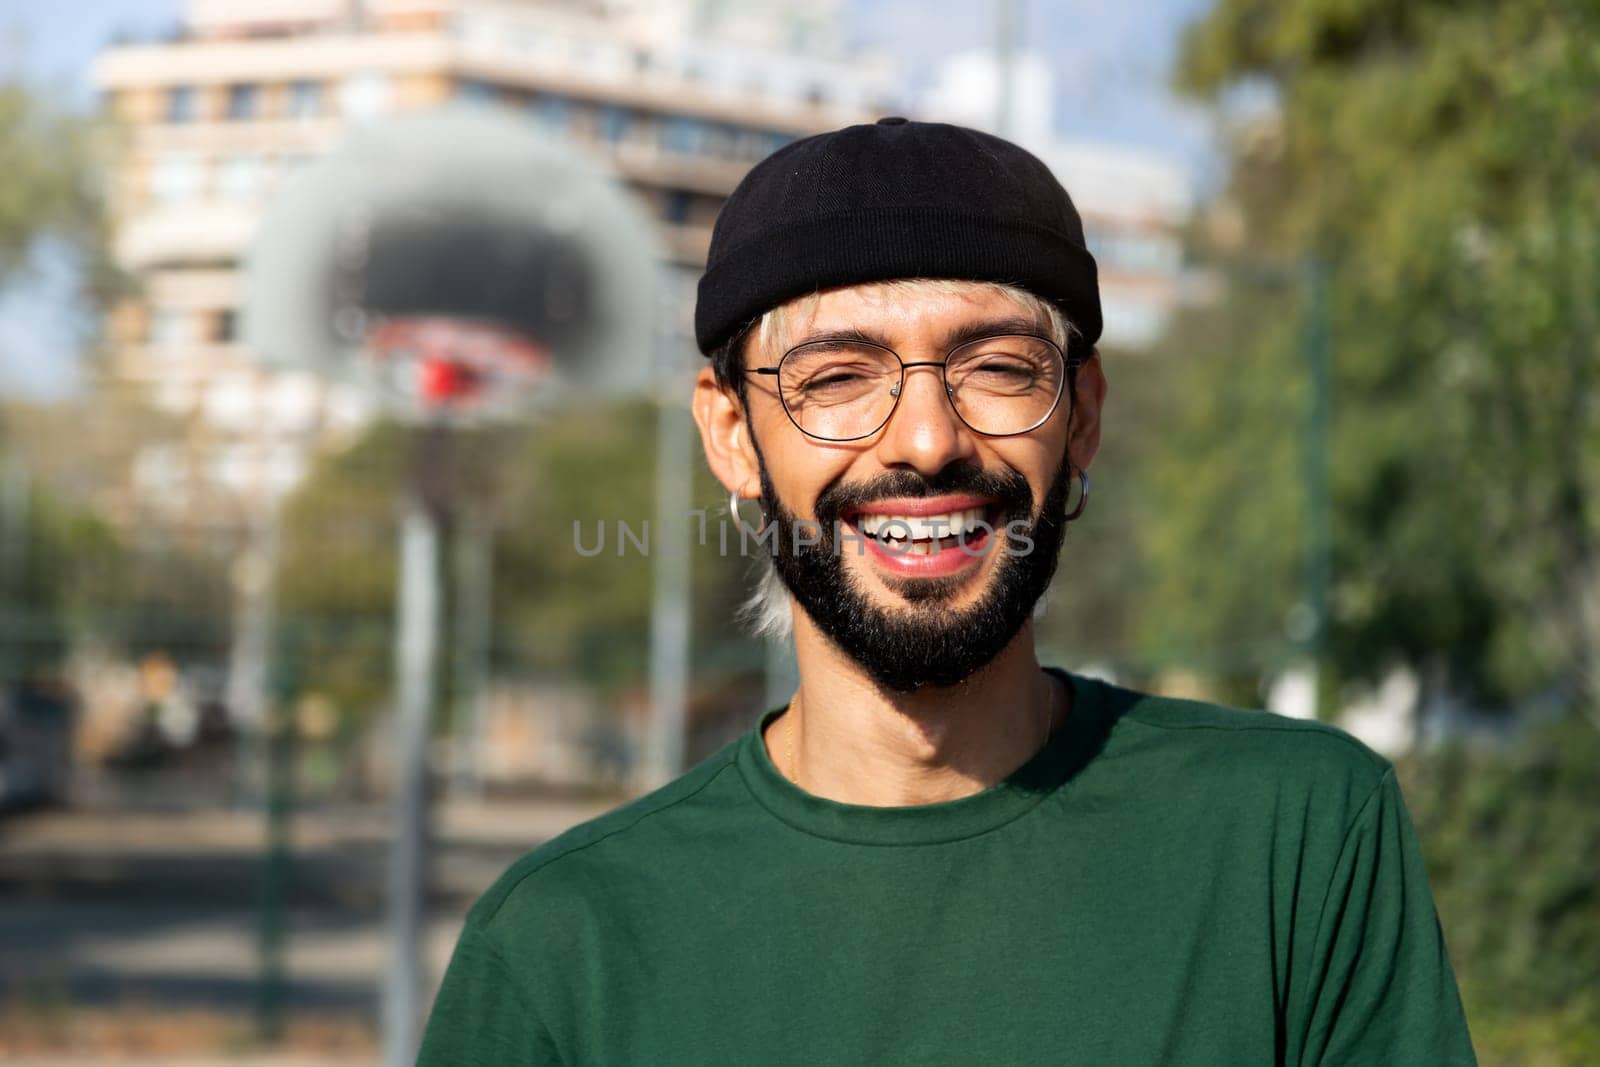 Headshot portrait of happy young caucasian man in basketball court outdoors looking at camera smiling. Copy space. Healthy lifestyle and sports concept.